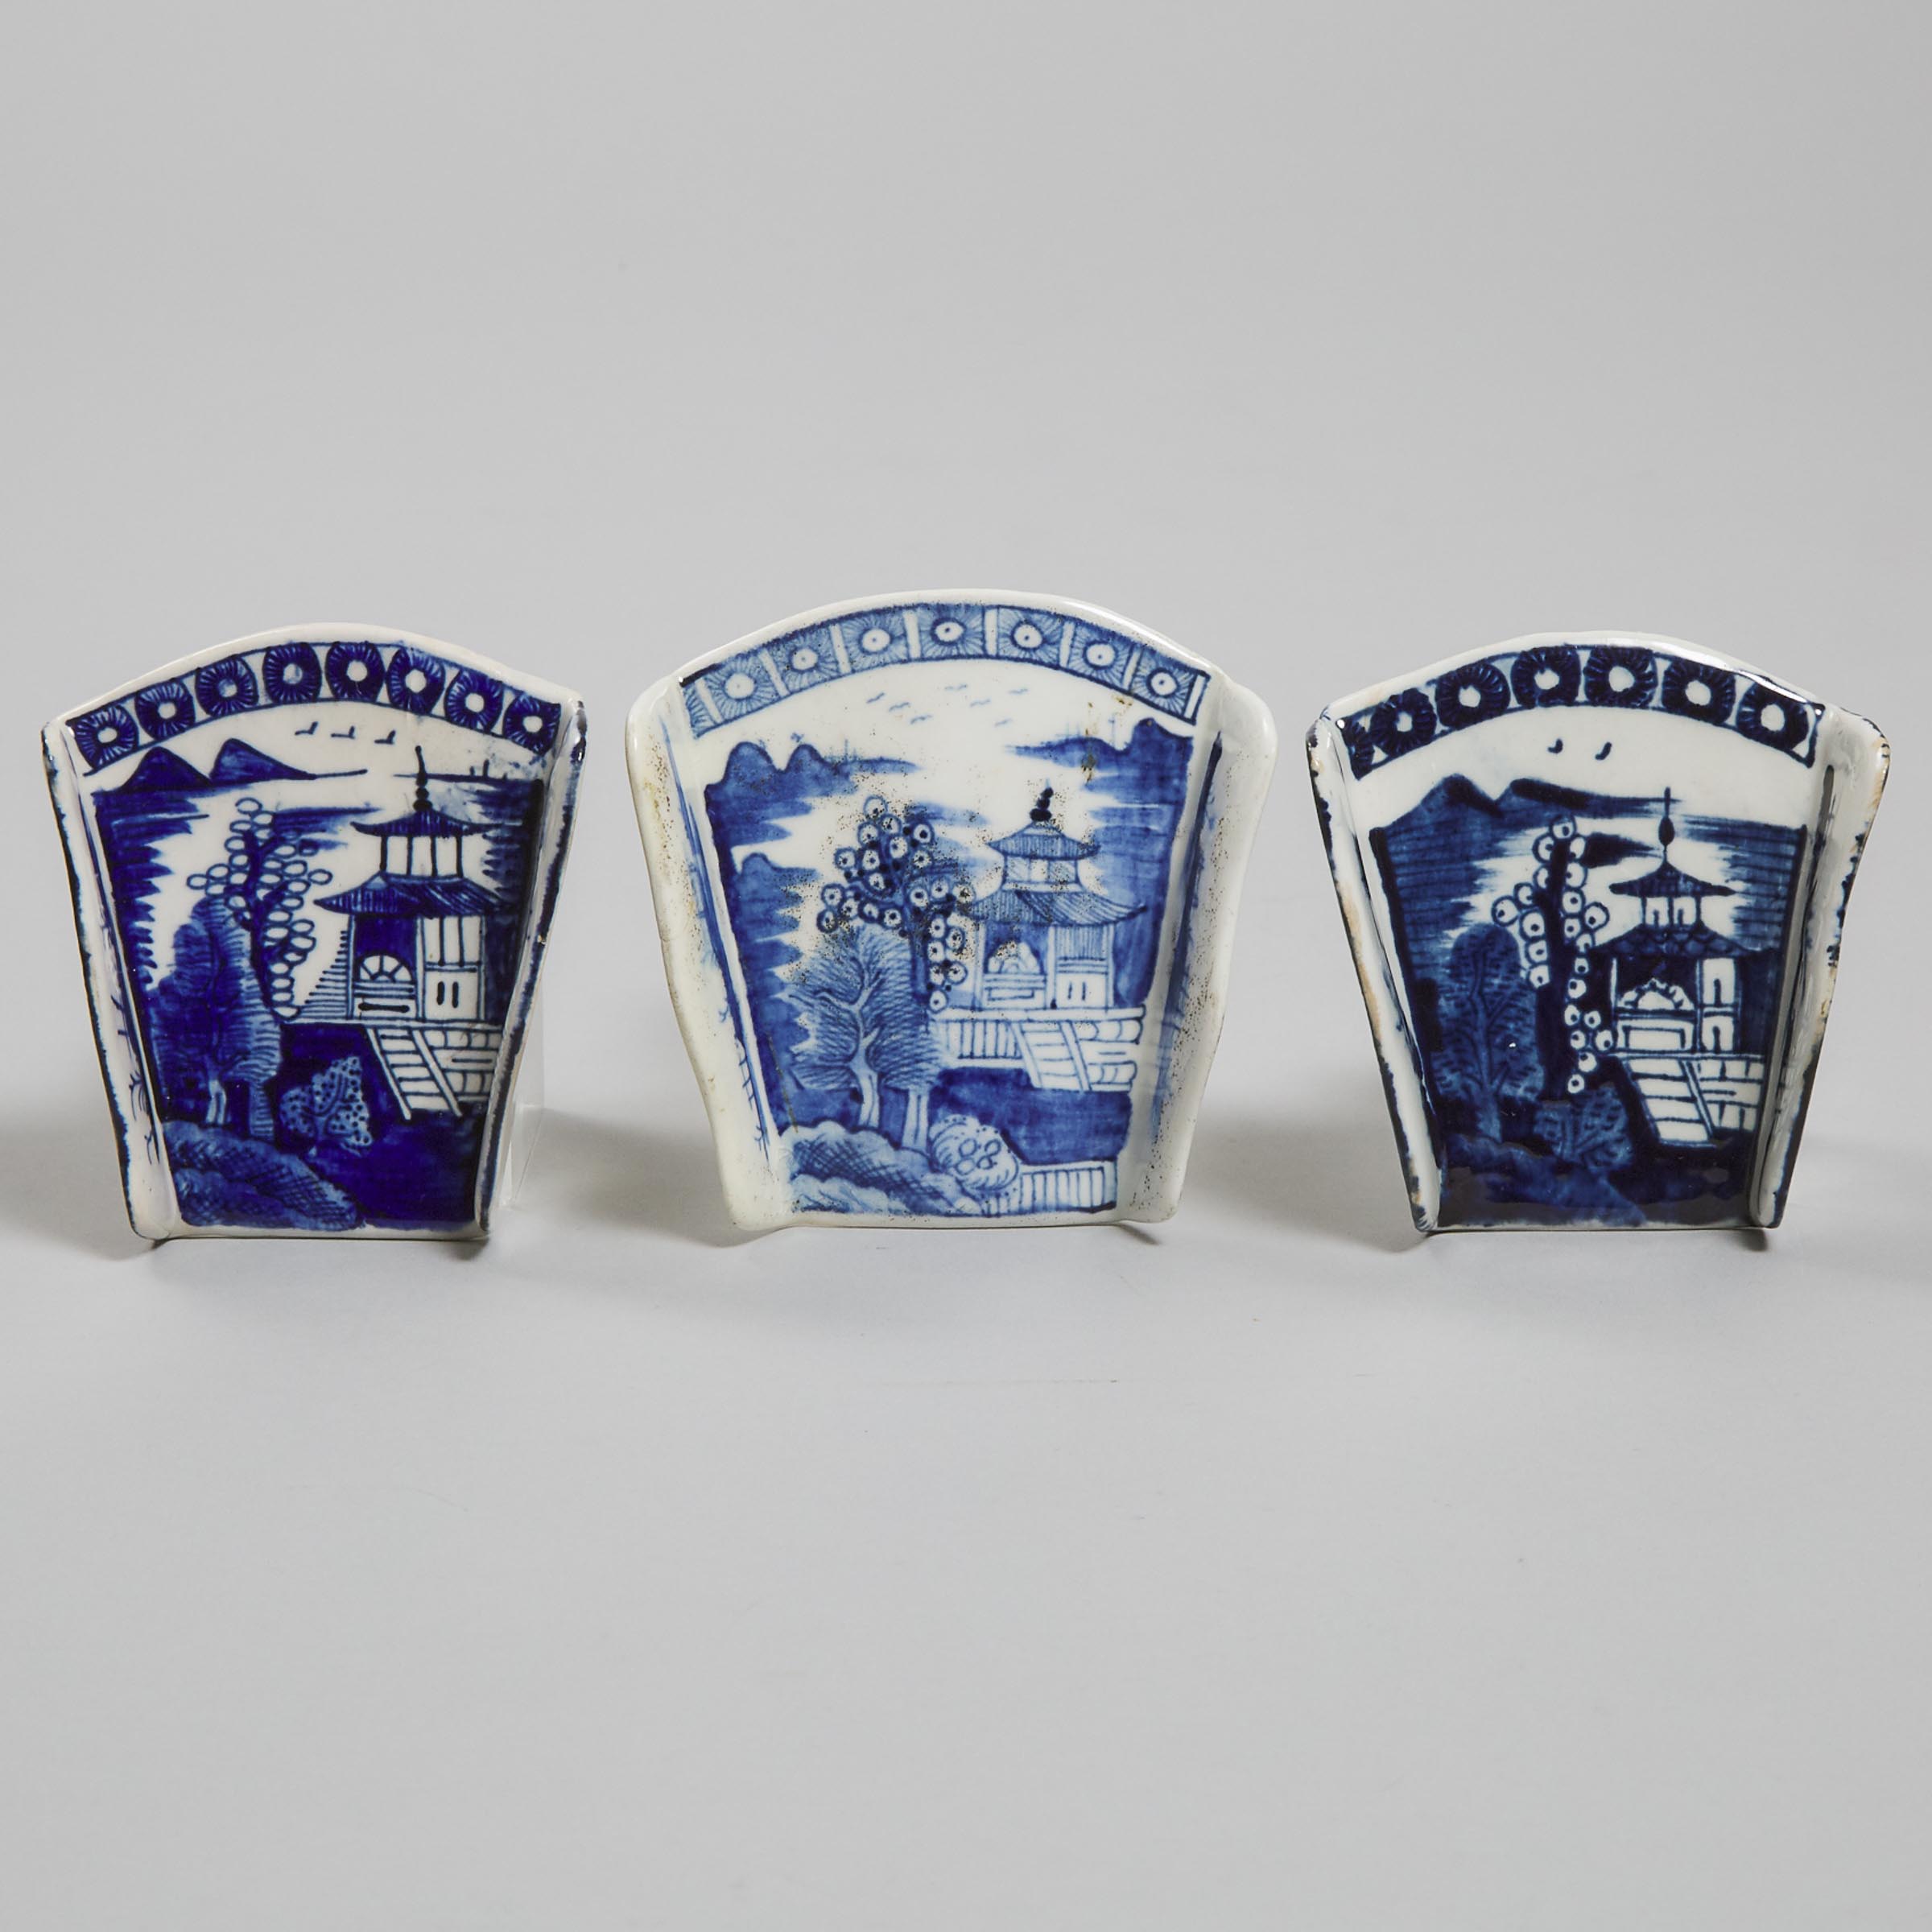 Three Derby Blue and White Asparagus Servers, c.1775-80